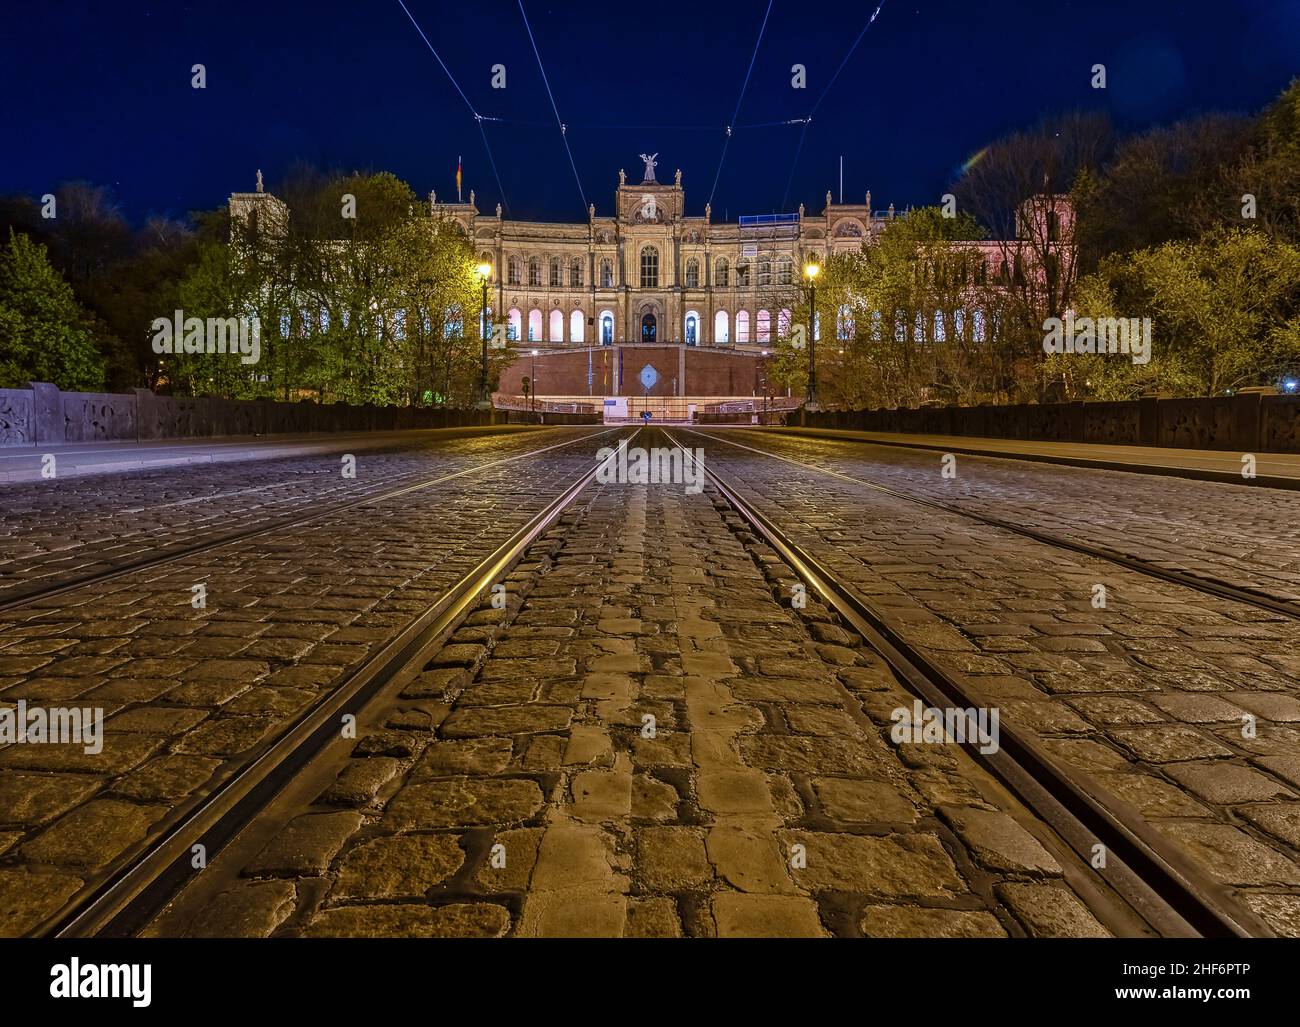 Low perspective symmetrical view over a tram track with popular Munich architecture in the background at night Stock Photo